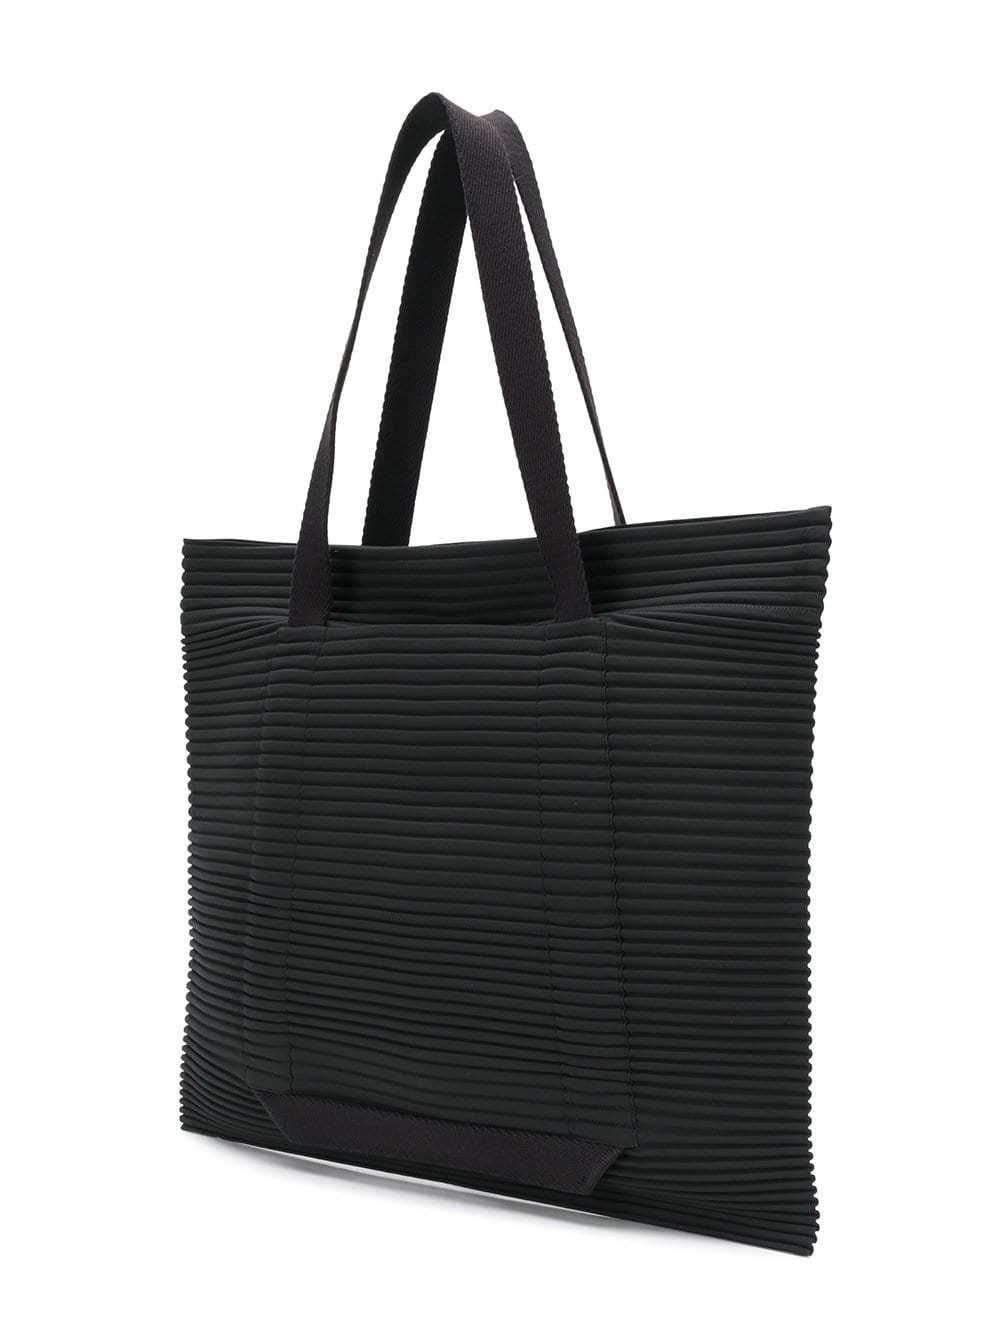 Homme Plissé Issey Miyake Oversized Pleated Tote, $550, farfetch.com